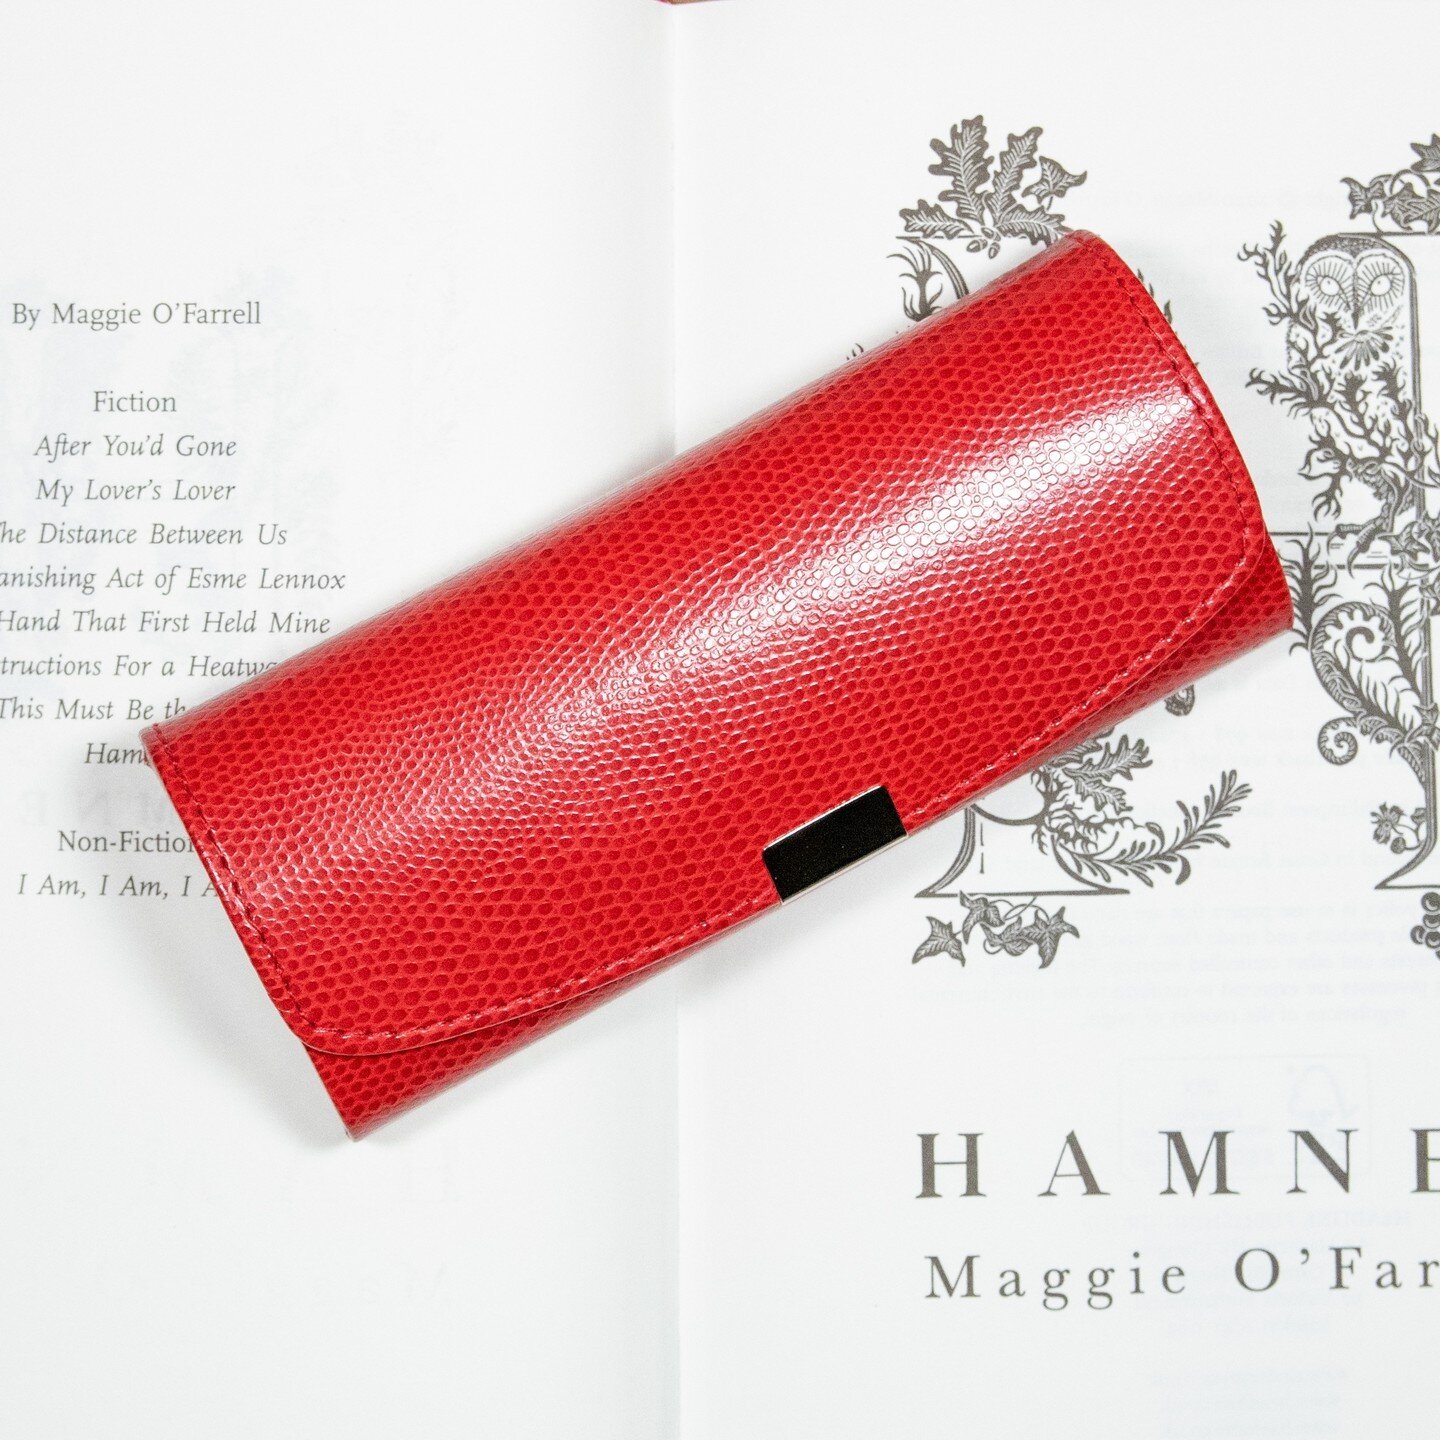 Protect your reading glasses in the stylish red FLAPPER case ❤️⁠
⁠
Designed with a trendy lizard skin finish, an exceptionally soft interior liner and a press stud closure.⁠
⁠
Available in 3 fashionable colours - red, tan and charcoal.⁠
⁠
Take a look